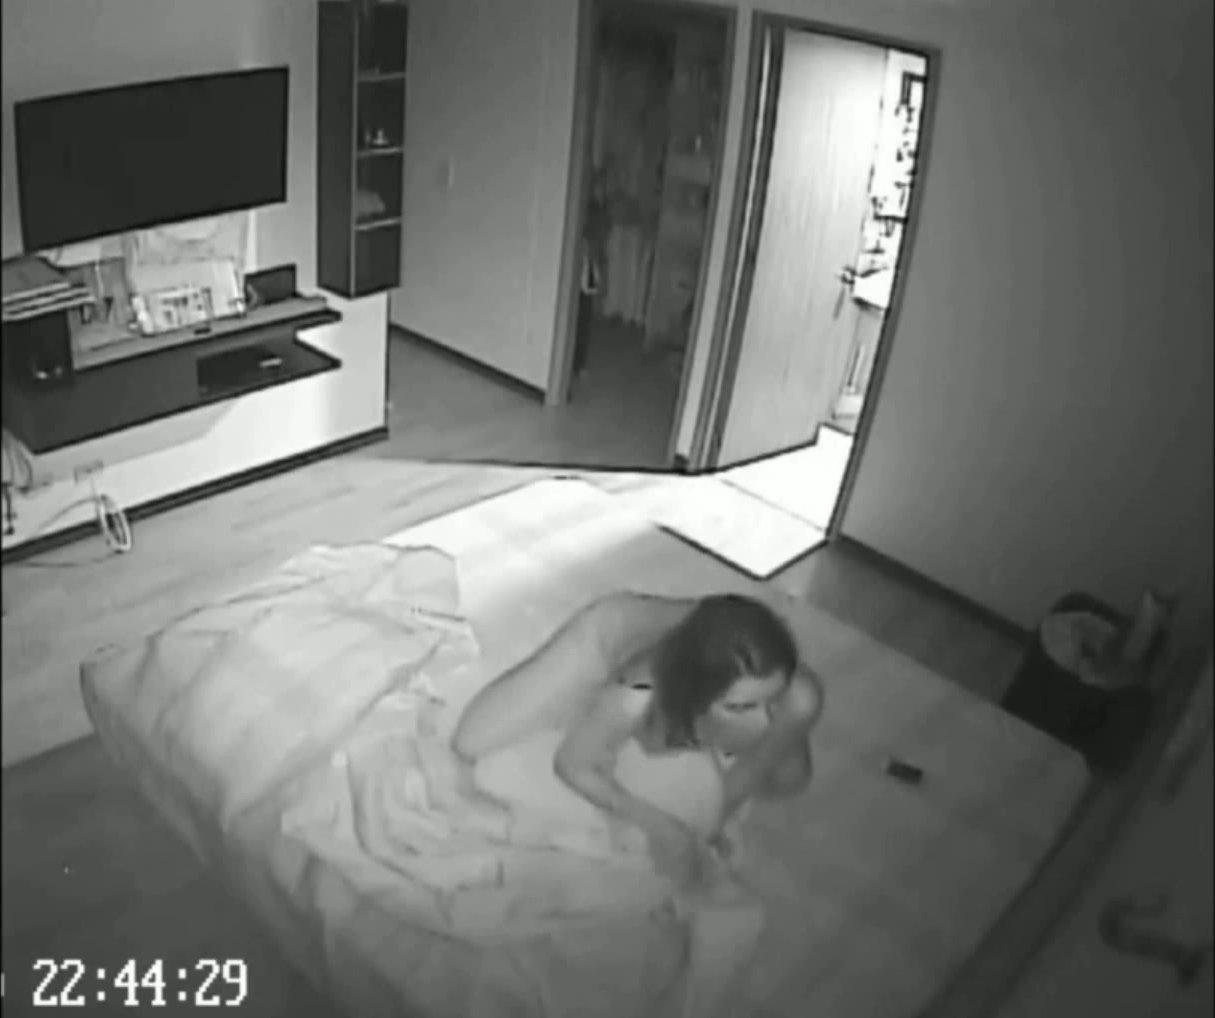 Straight Voyeur 2 hacked Ip cam pillow humping pic